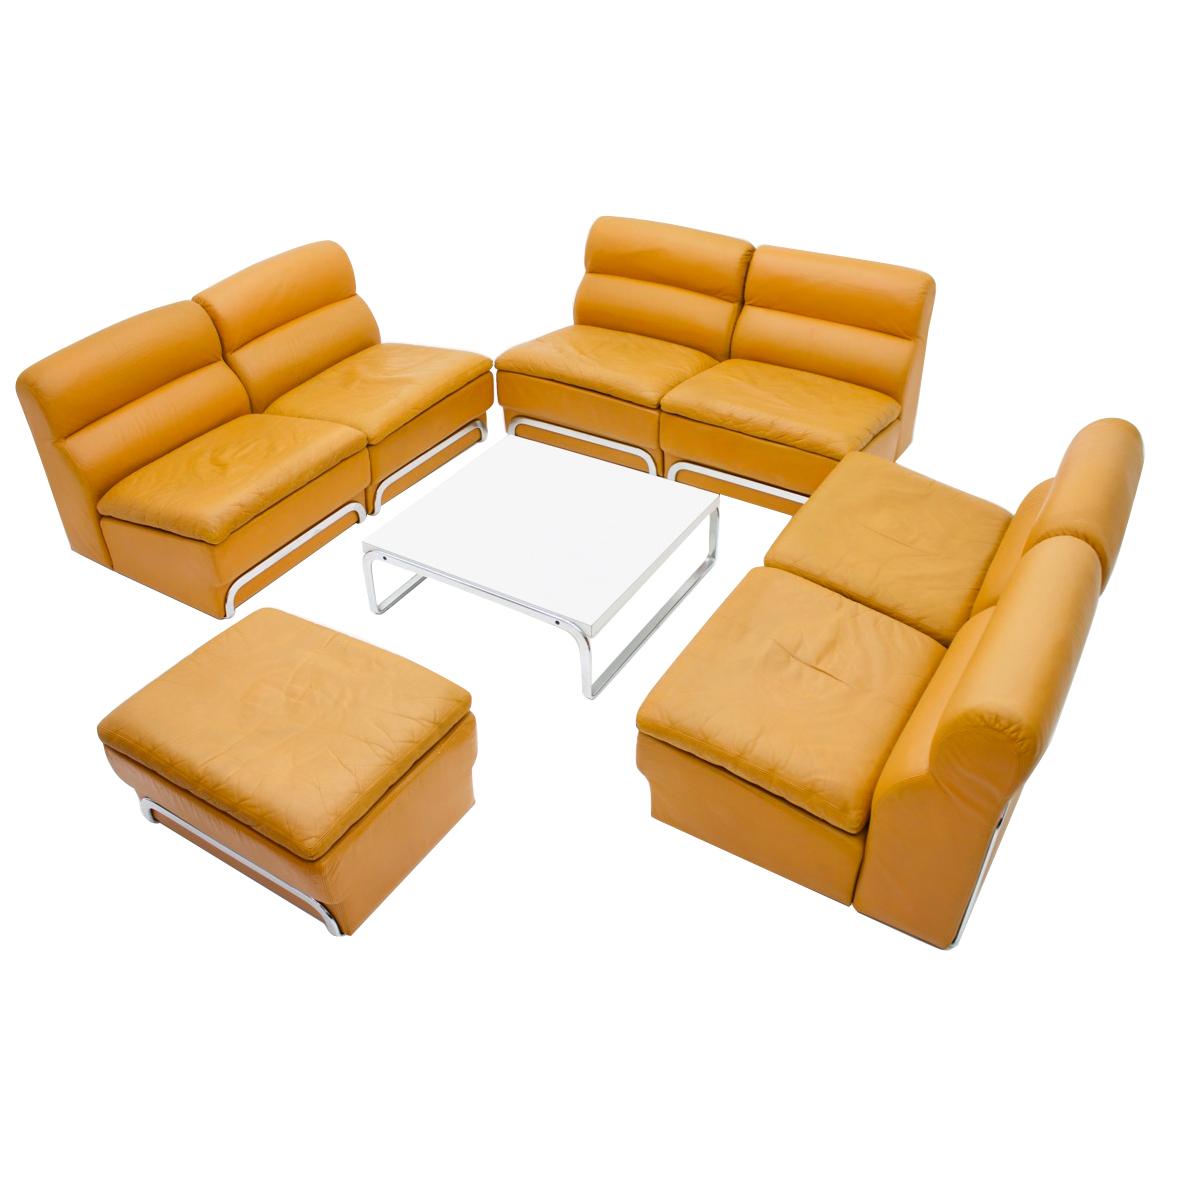 Modular Sofa Set & Table Light Brown Leather by Horst Bruning for Kill 1970s